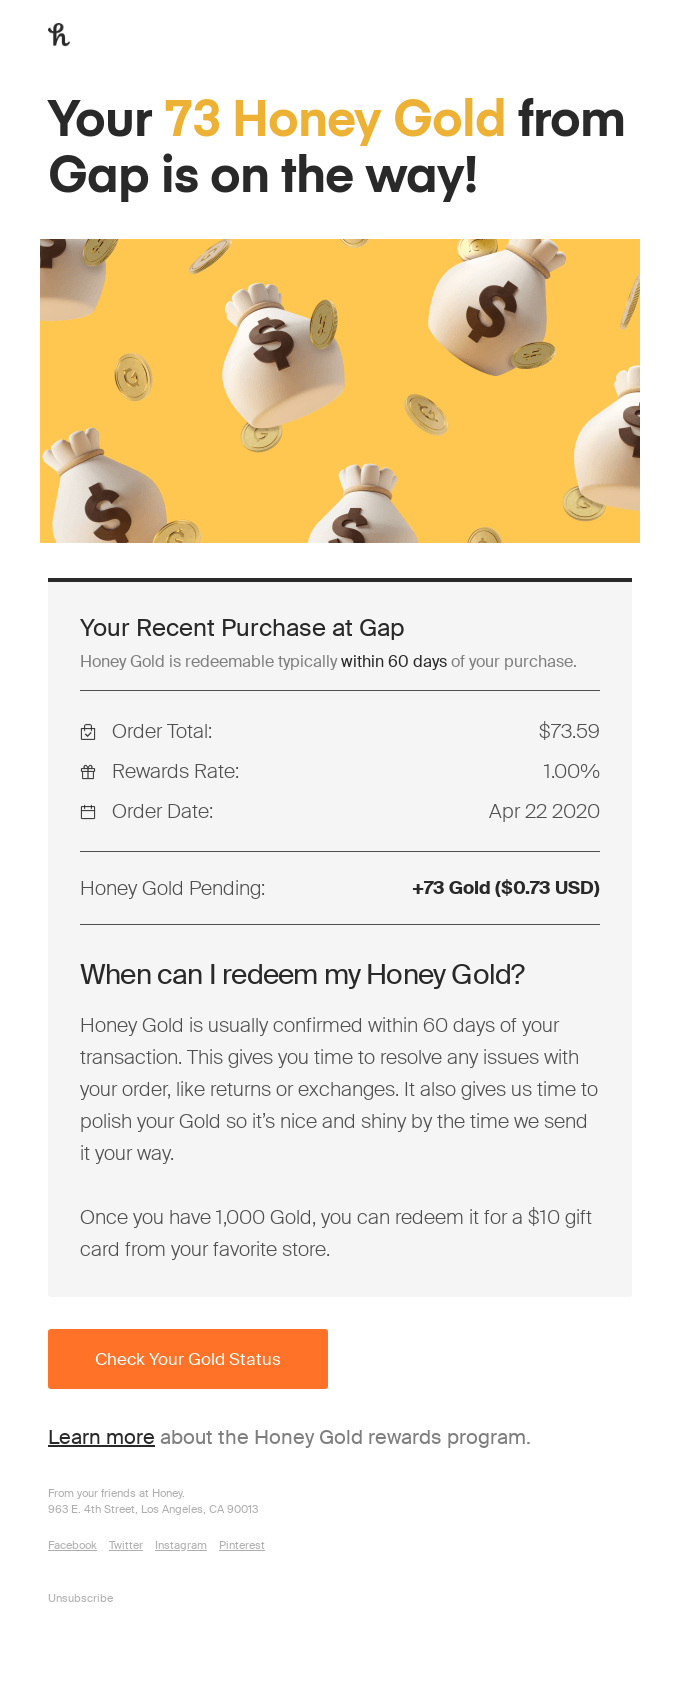 You just earned Honey Gold from Gap!